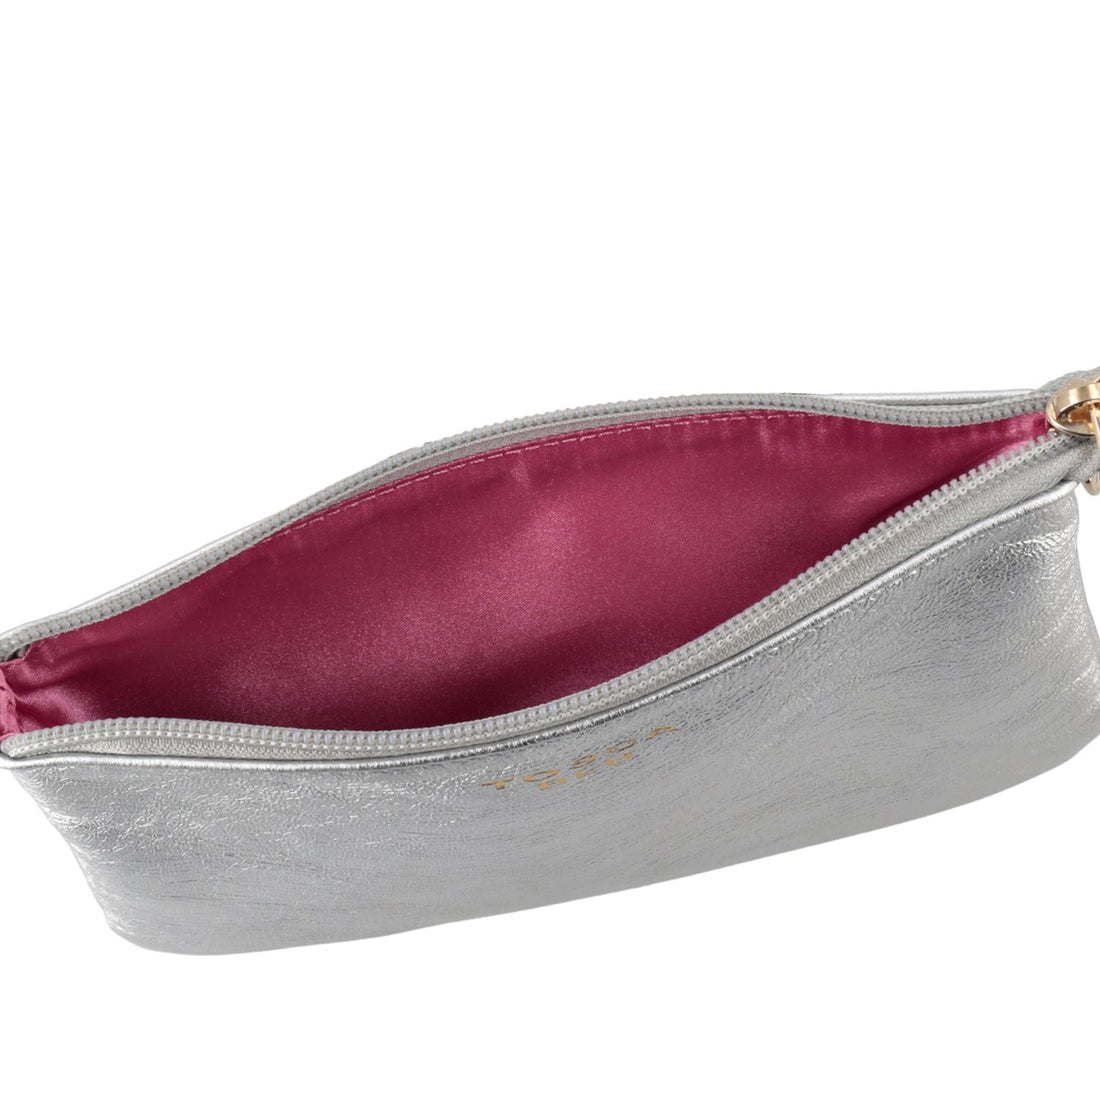 SILVER TEQUILA SUNRISE LEATHER POUCH